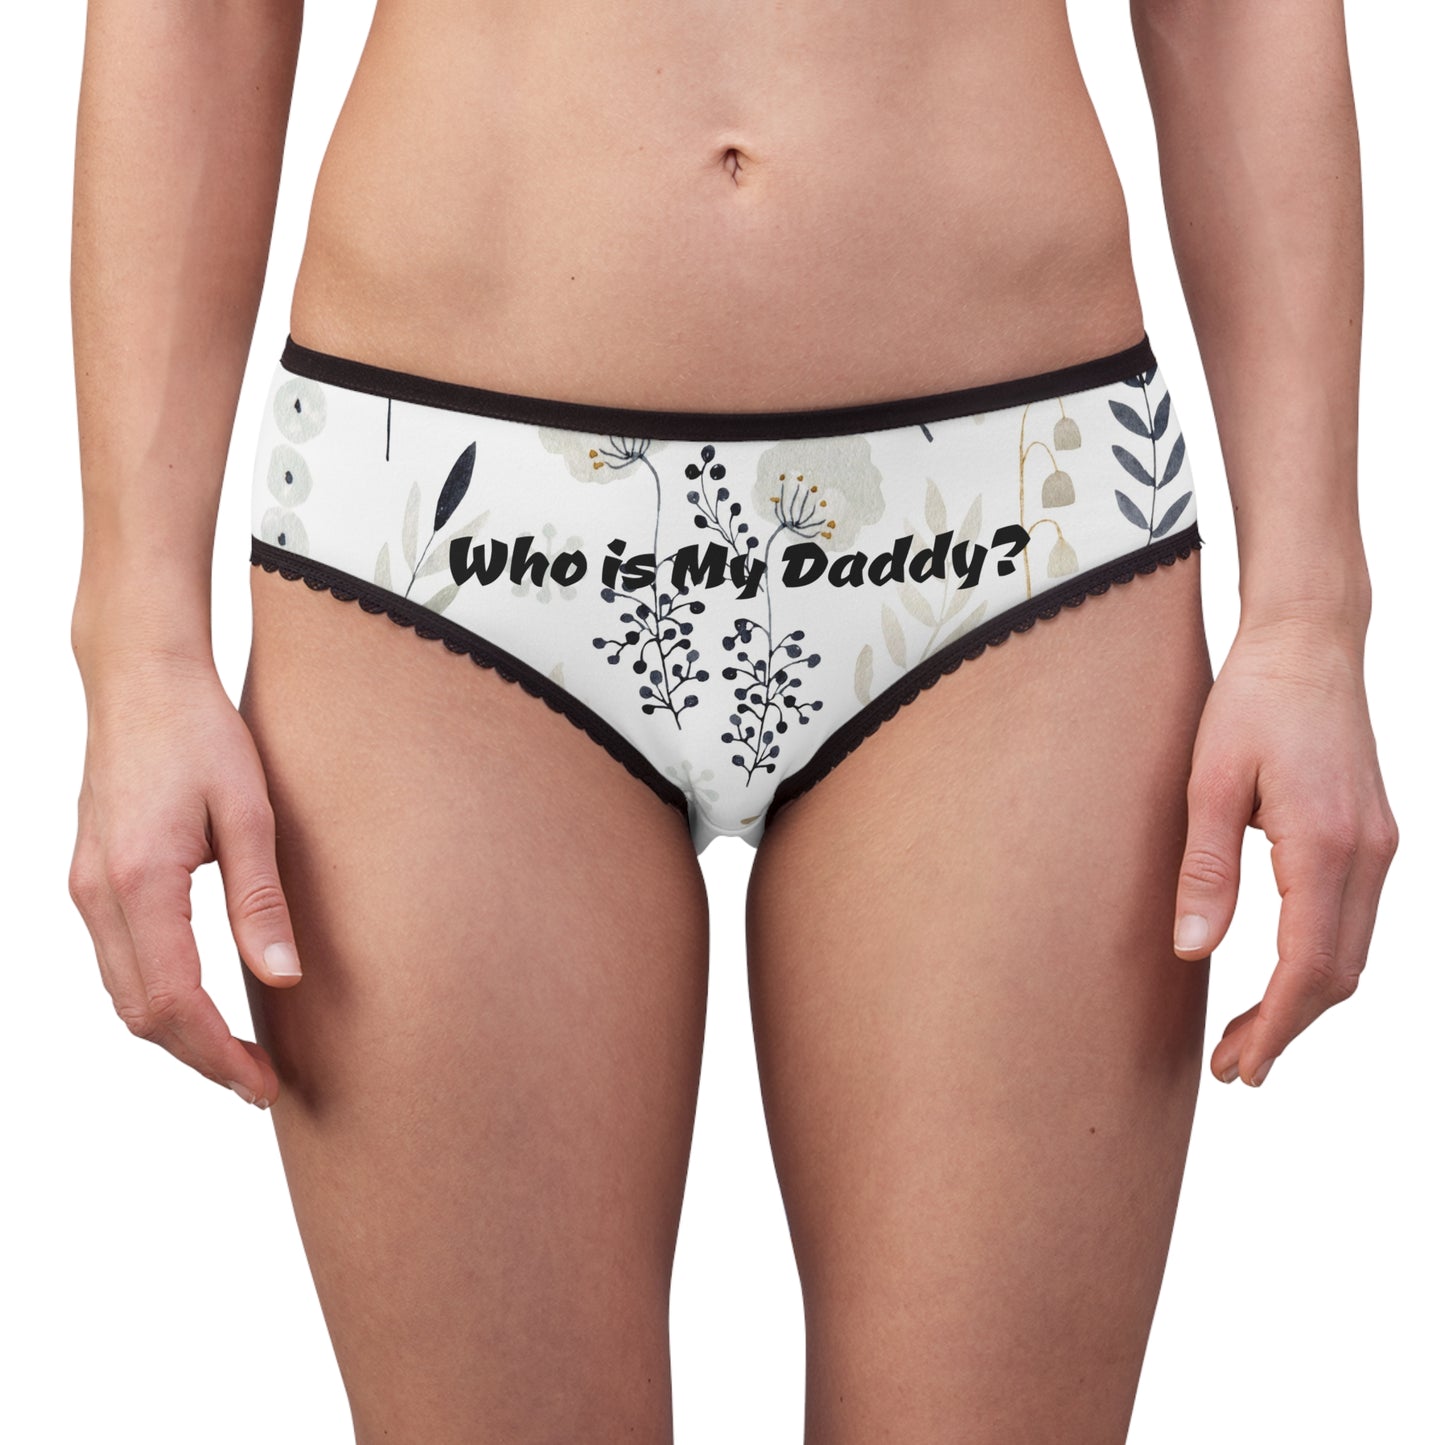 Fashion Women's Briefs - Who is My Daddy?